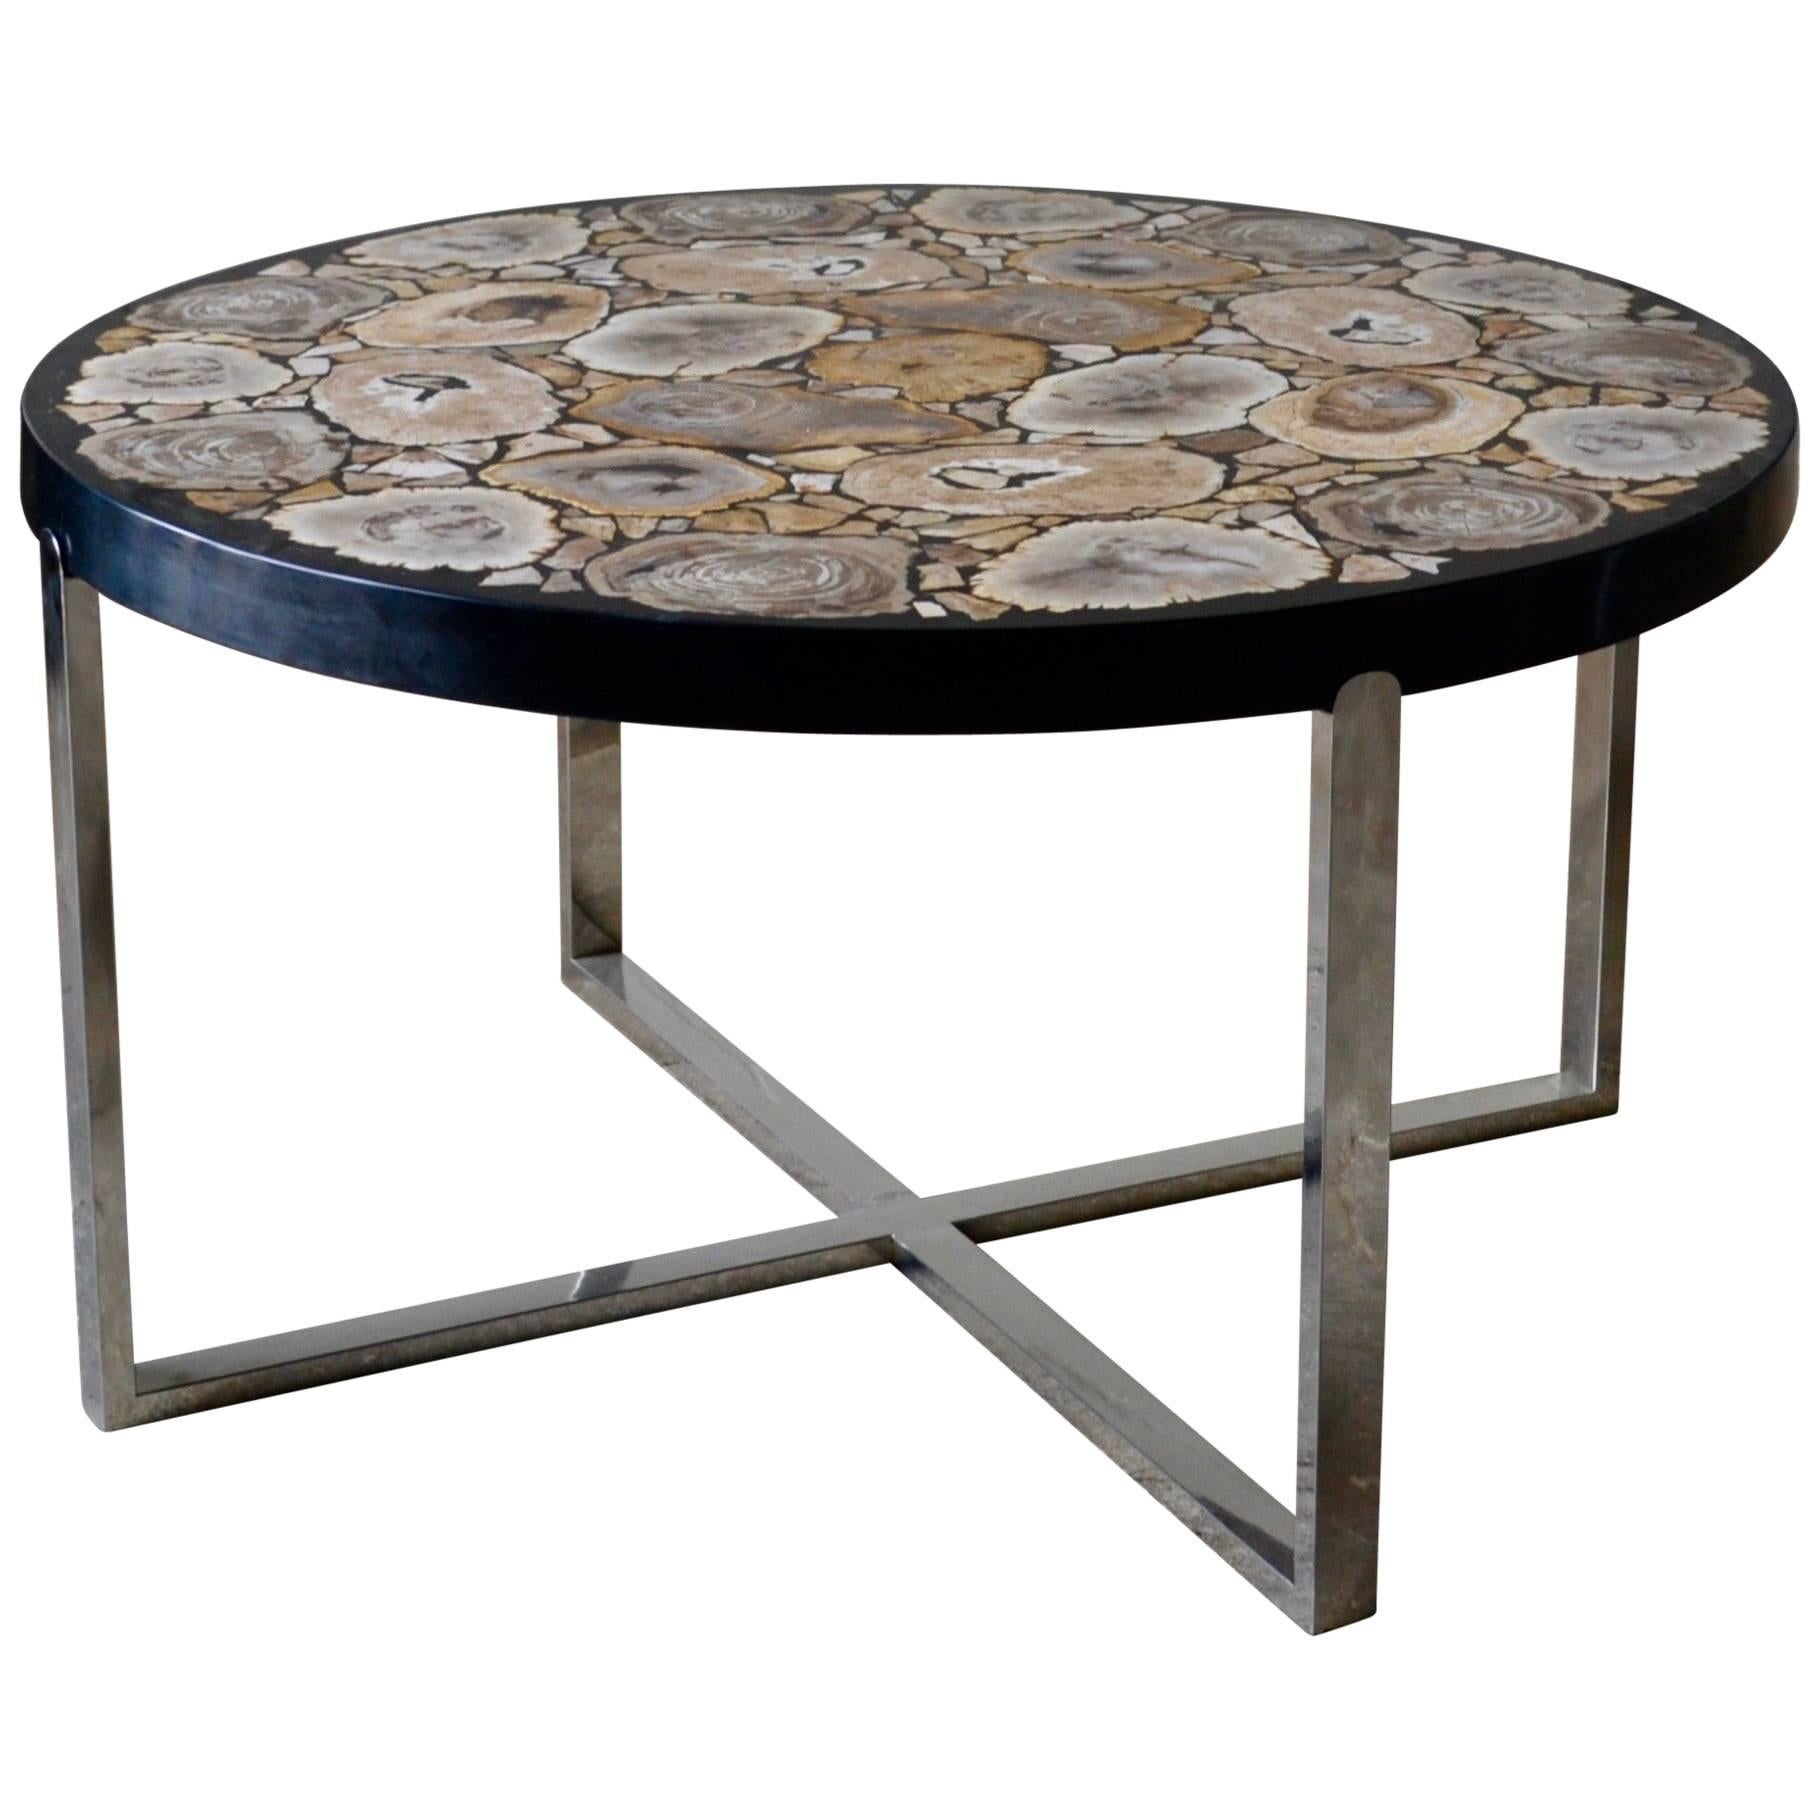 Petrified Wood Round Coffee Table Black Gloss and Stainless Steel Base For Sale